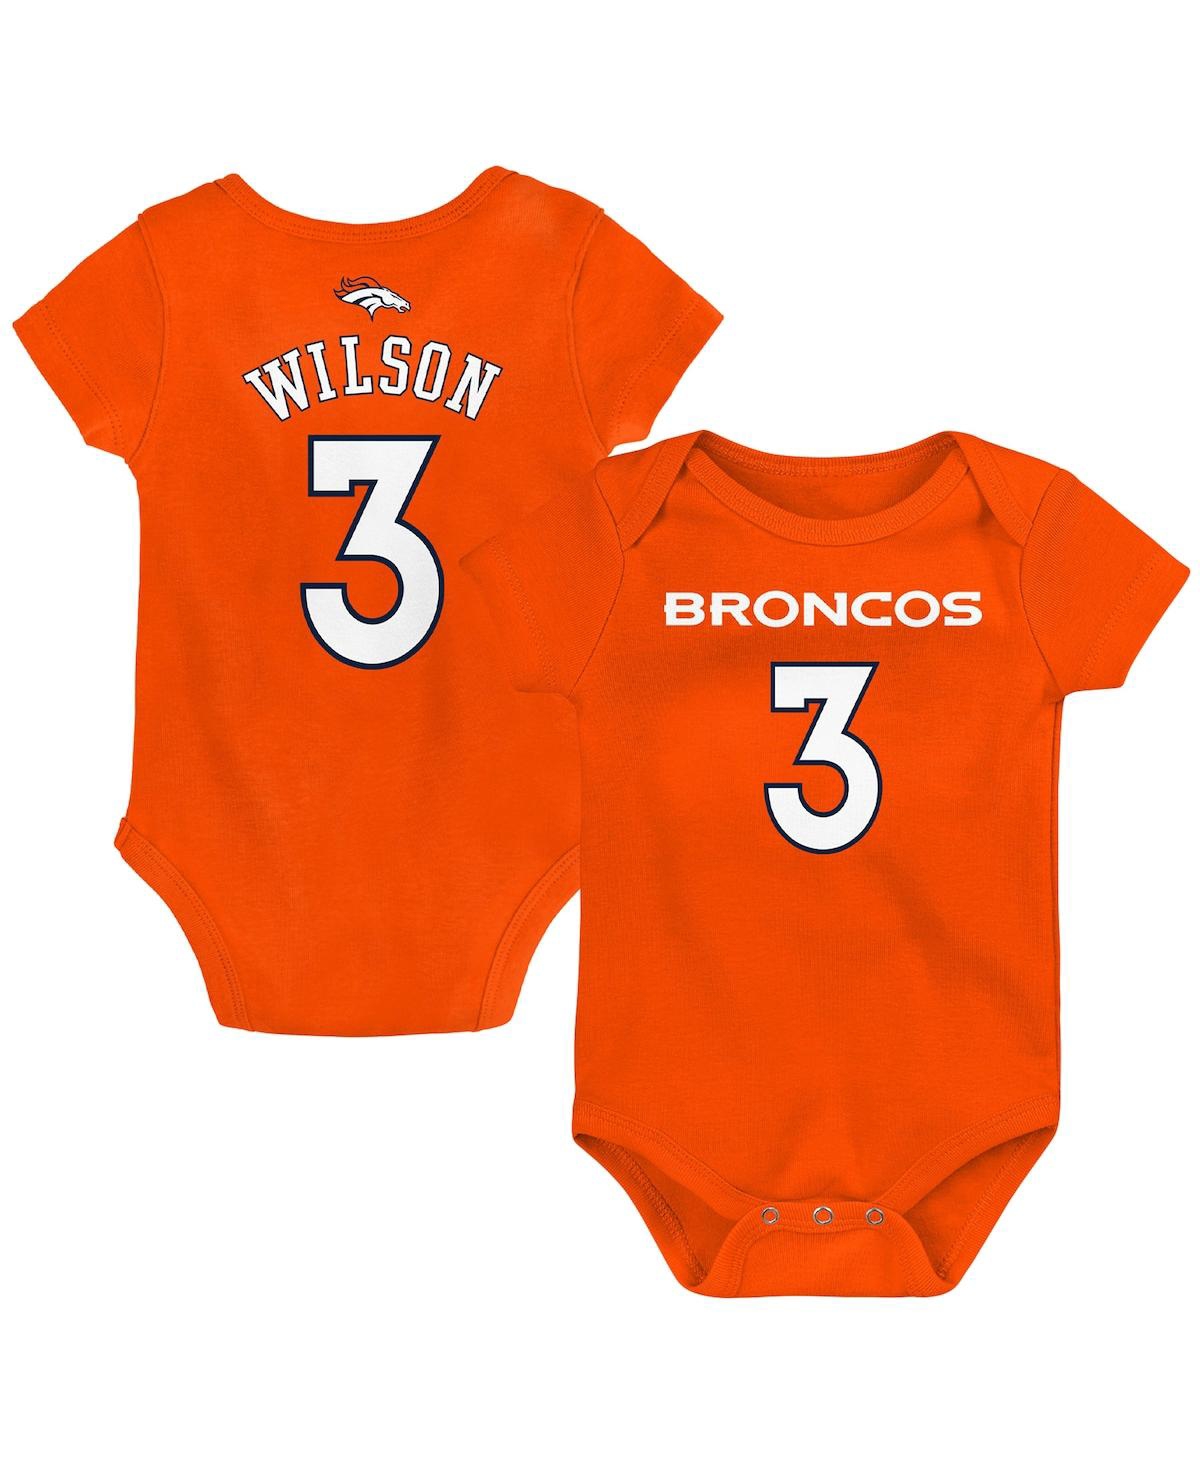 Outerstuff Babies' Newborn And Infant Boys And Girls Russell Wilson Orange Denver Broncos Mainliner Player Name And Num